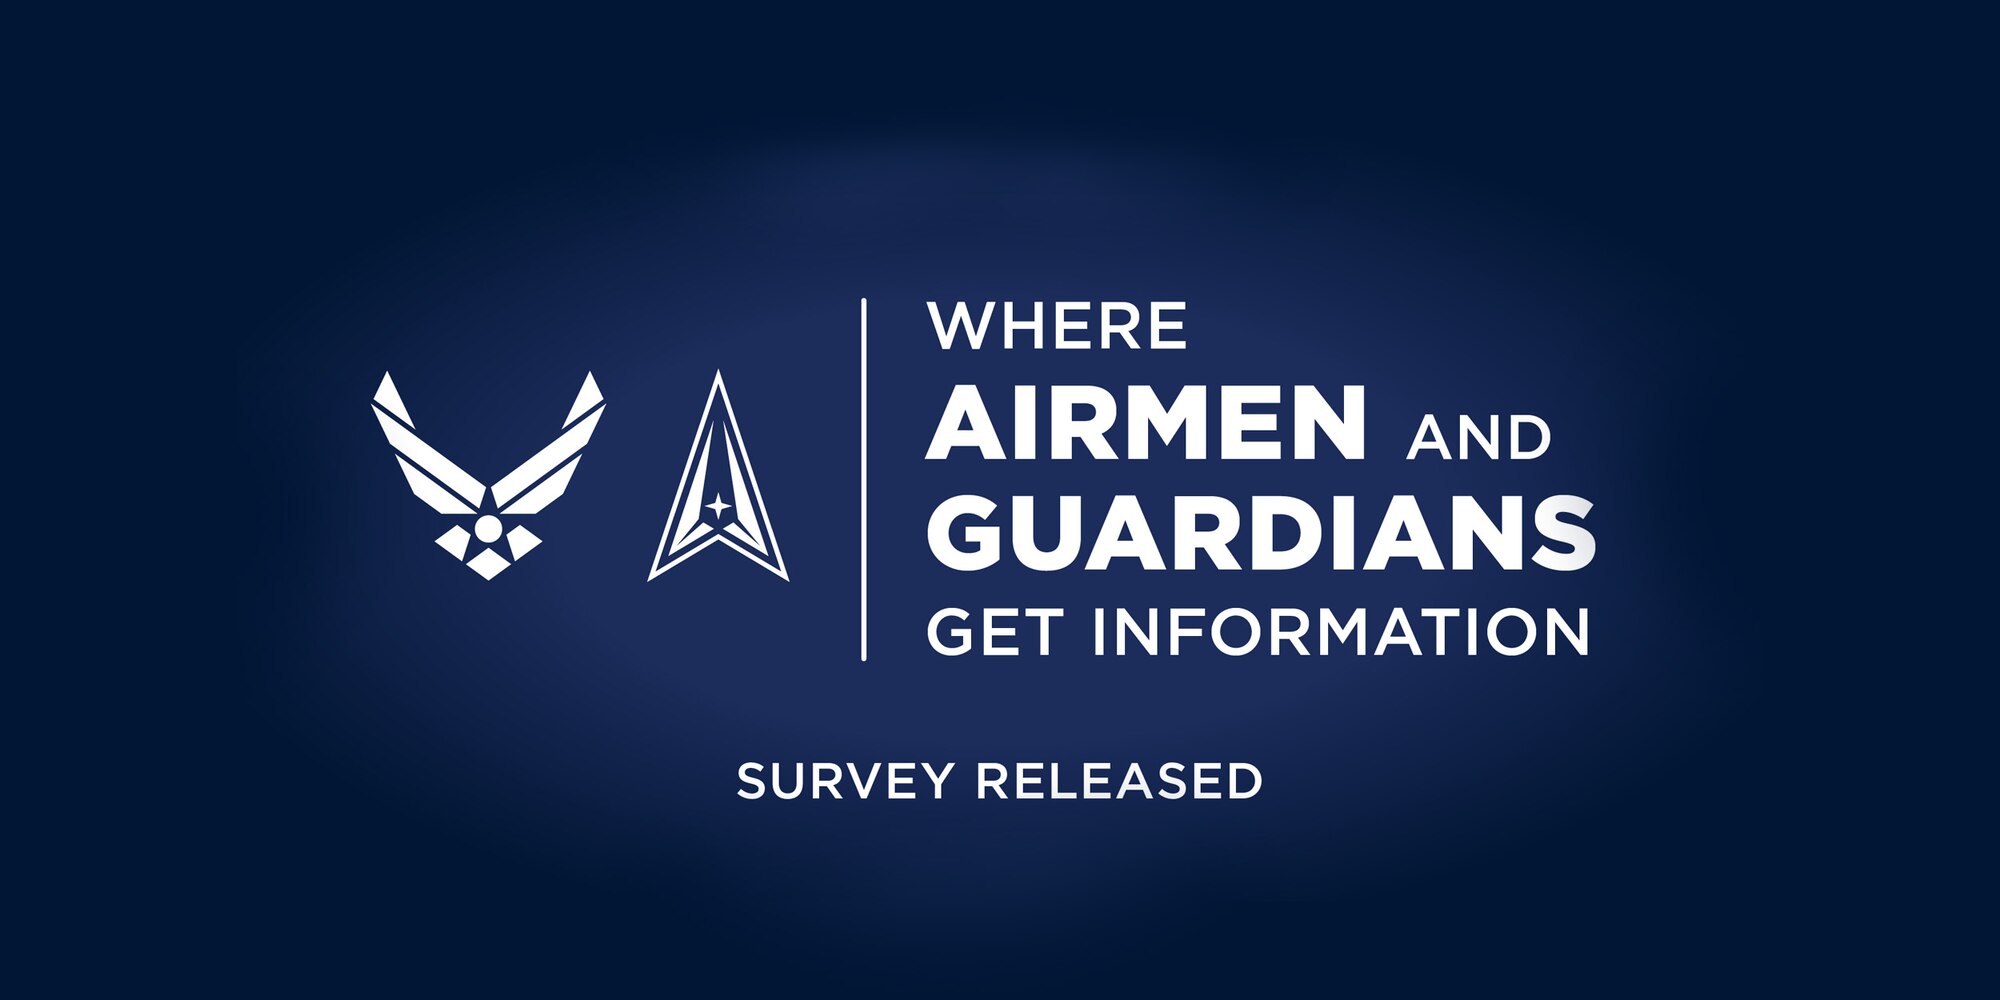 Airmen and Guardians can influence how leaders share information through latest WAGGI survey